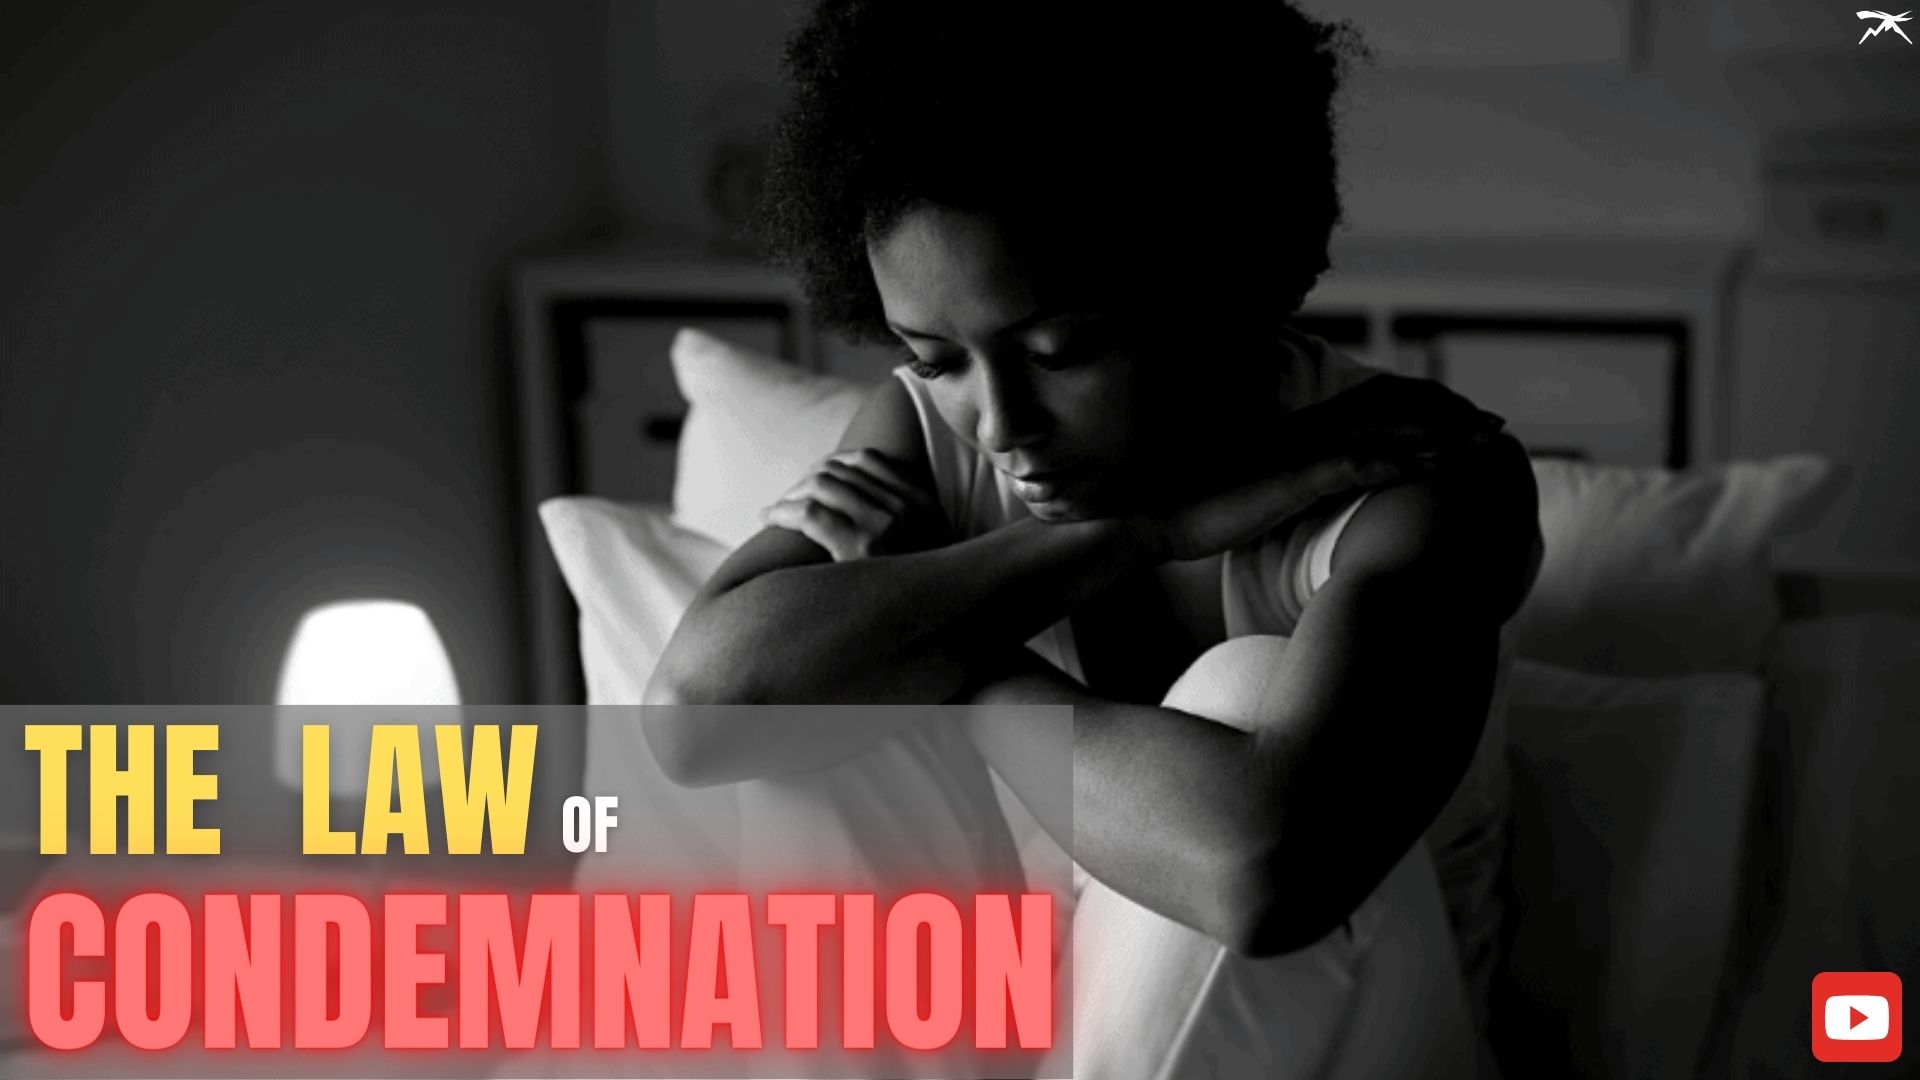 The LAW of CONDEMNATION: Why Many Christians NEVER STOP Committing Sin